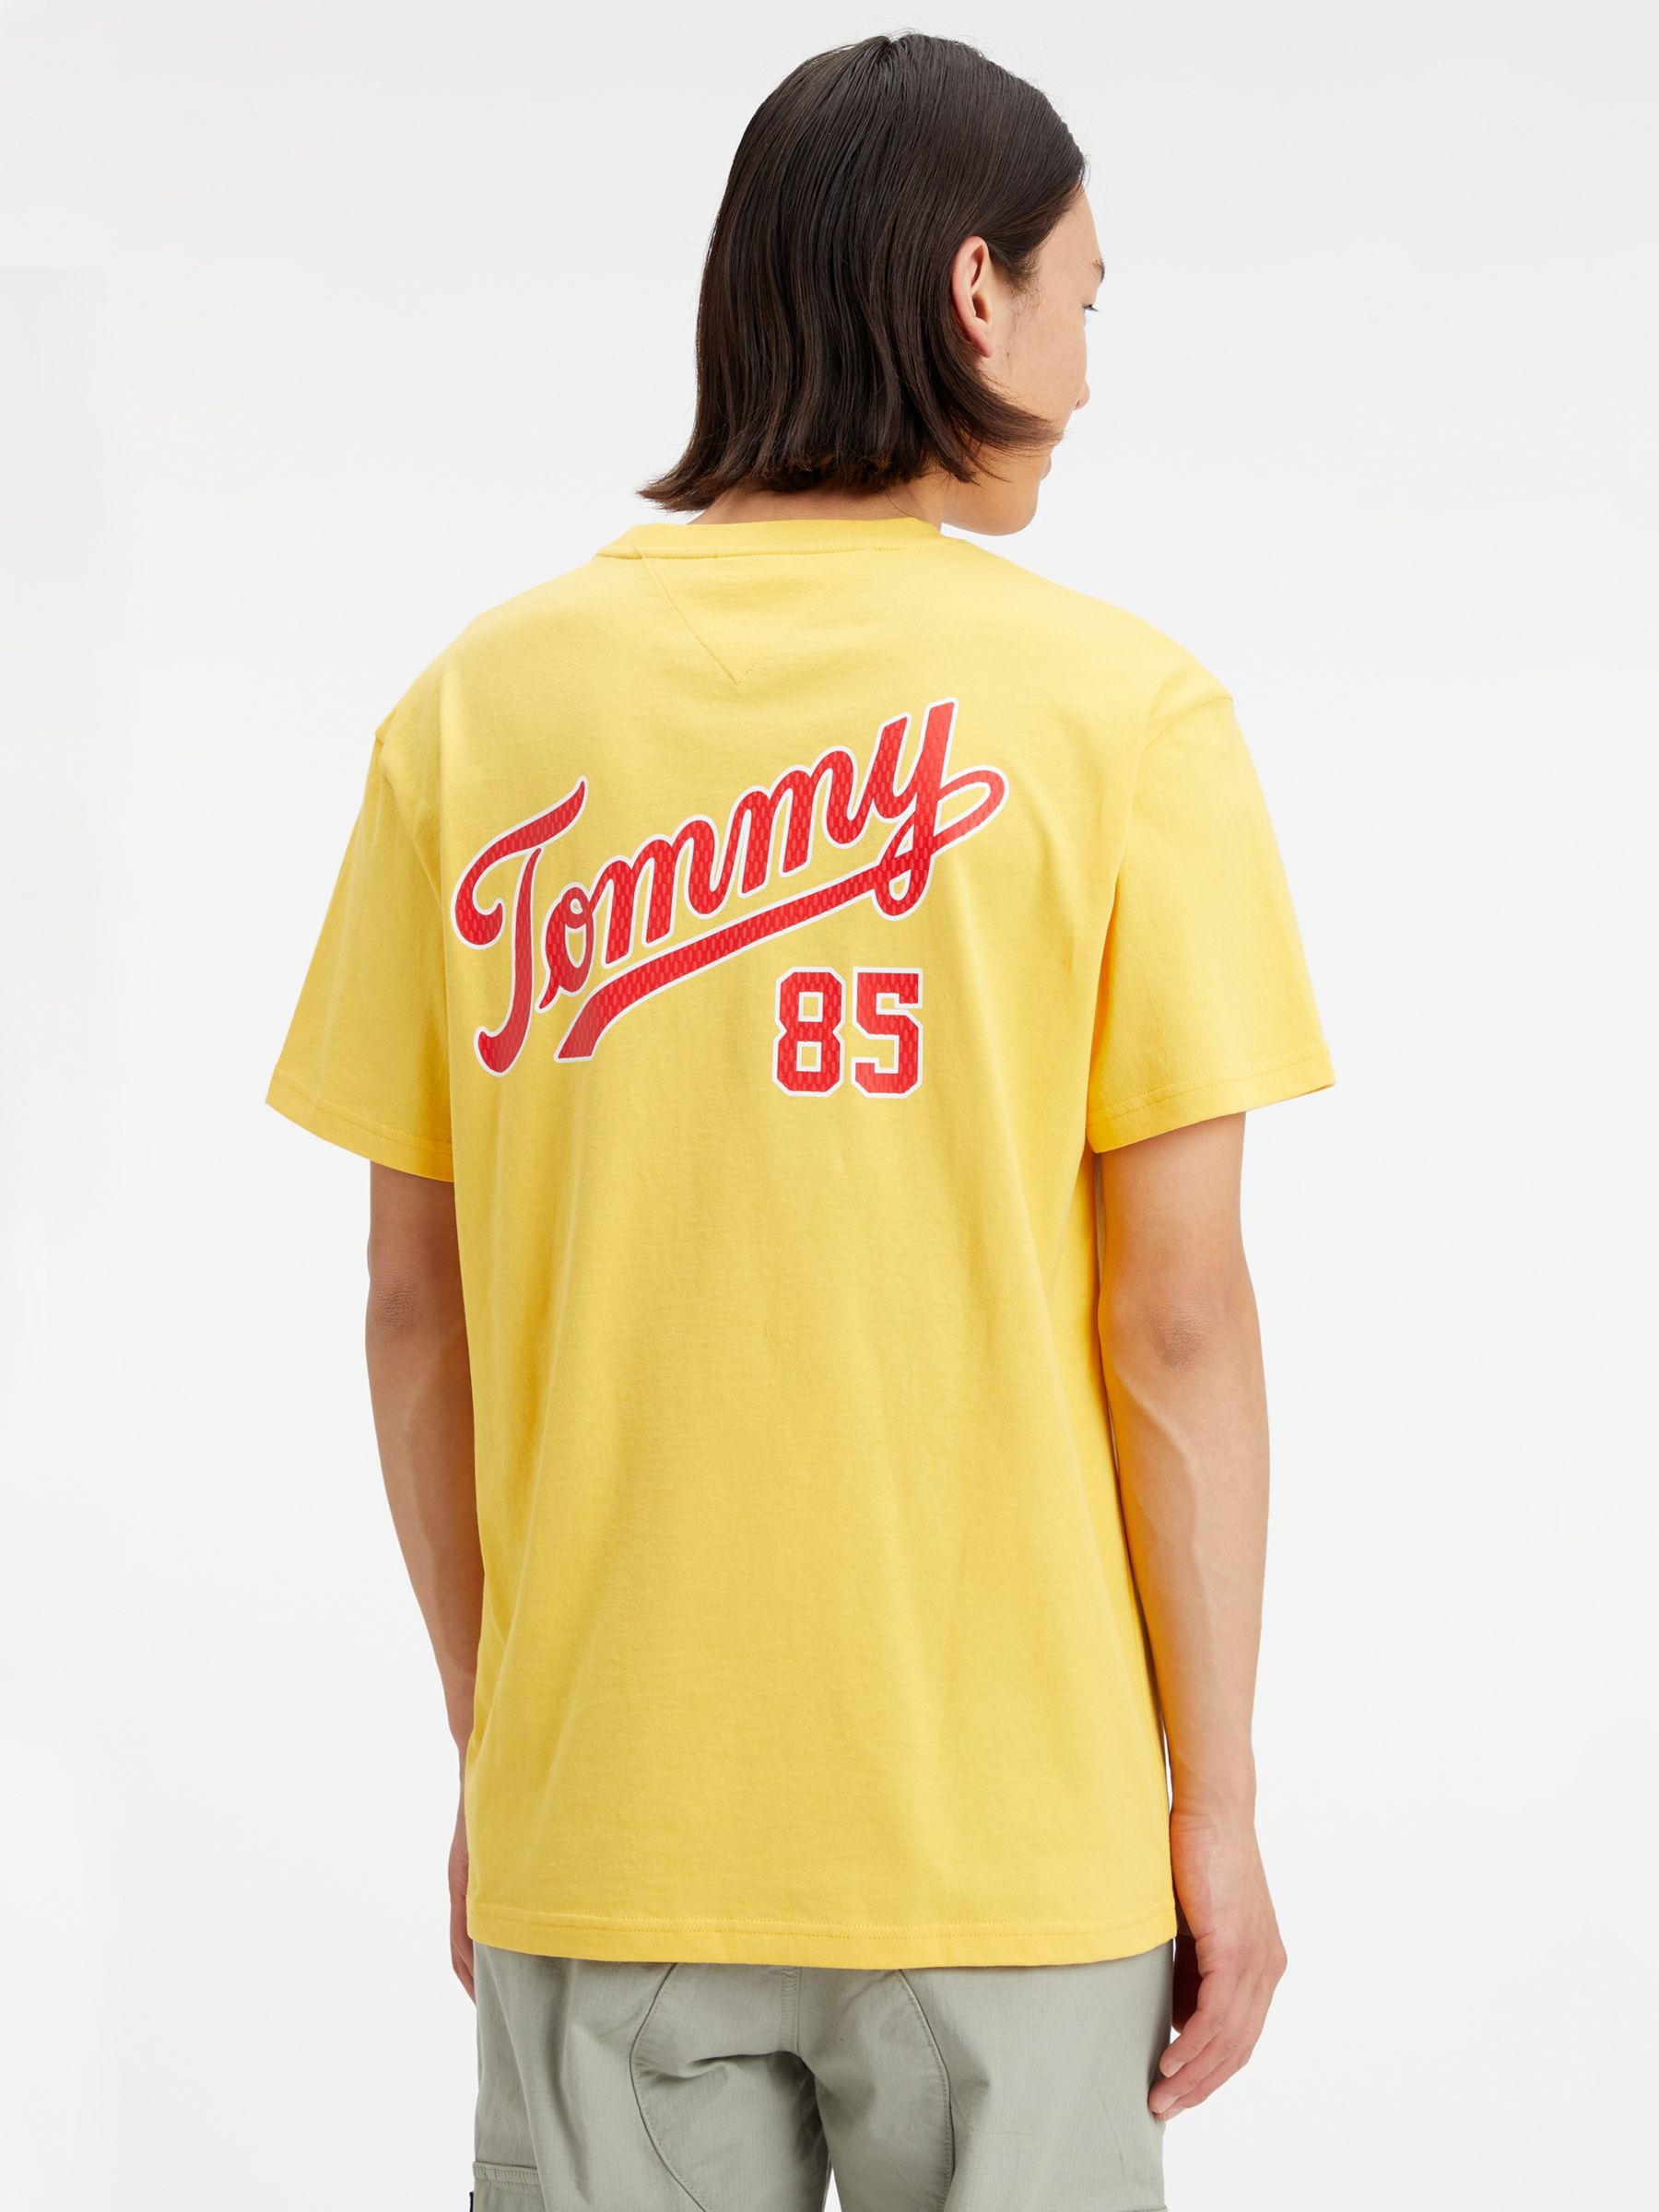 Tommy Jeans 85 T-Shirt, Cotton Partners Lewis at Organic Yellow & Warm College John Logo